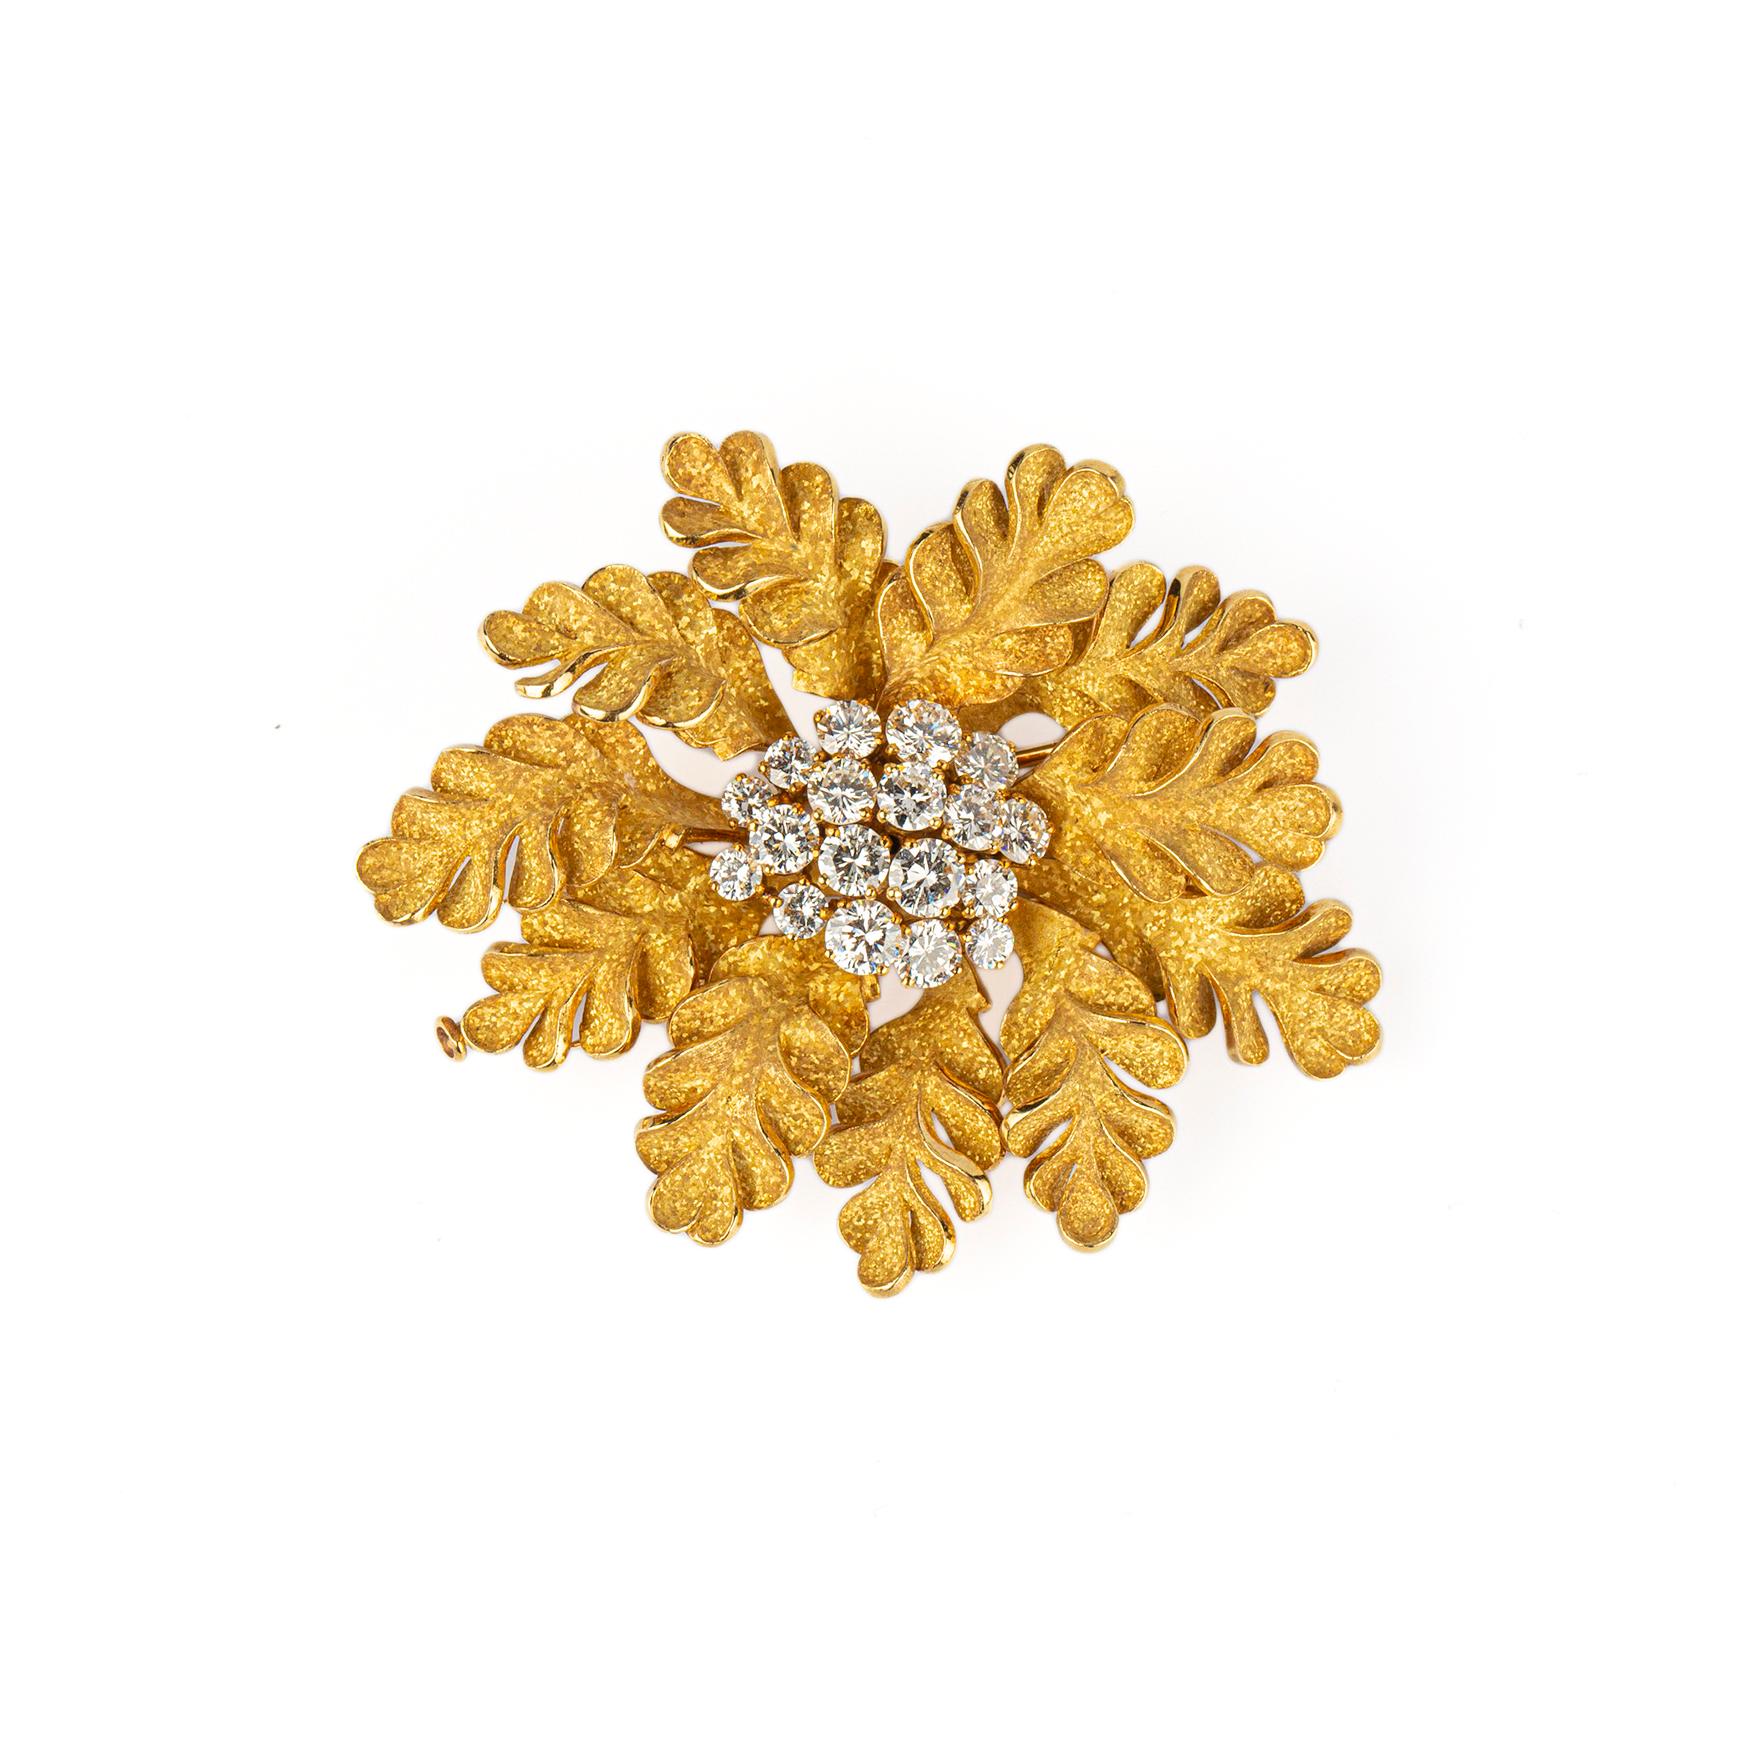 Bulgari 18k Yellow Gold and Diamond brooch of foliate design, set with approximately 3.5 carats of diamonds. Made in Italy, circa 1970 

This brooch is a highly collectible item as a similar one is published in the Bulgari book.